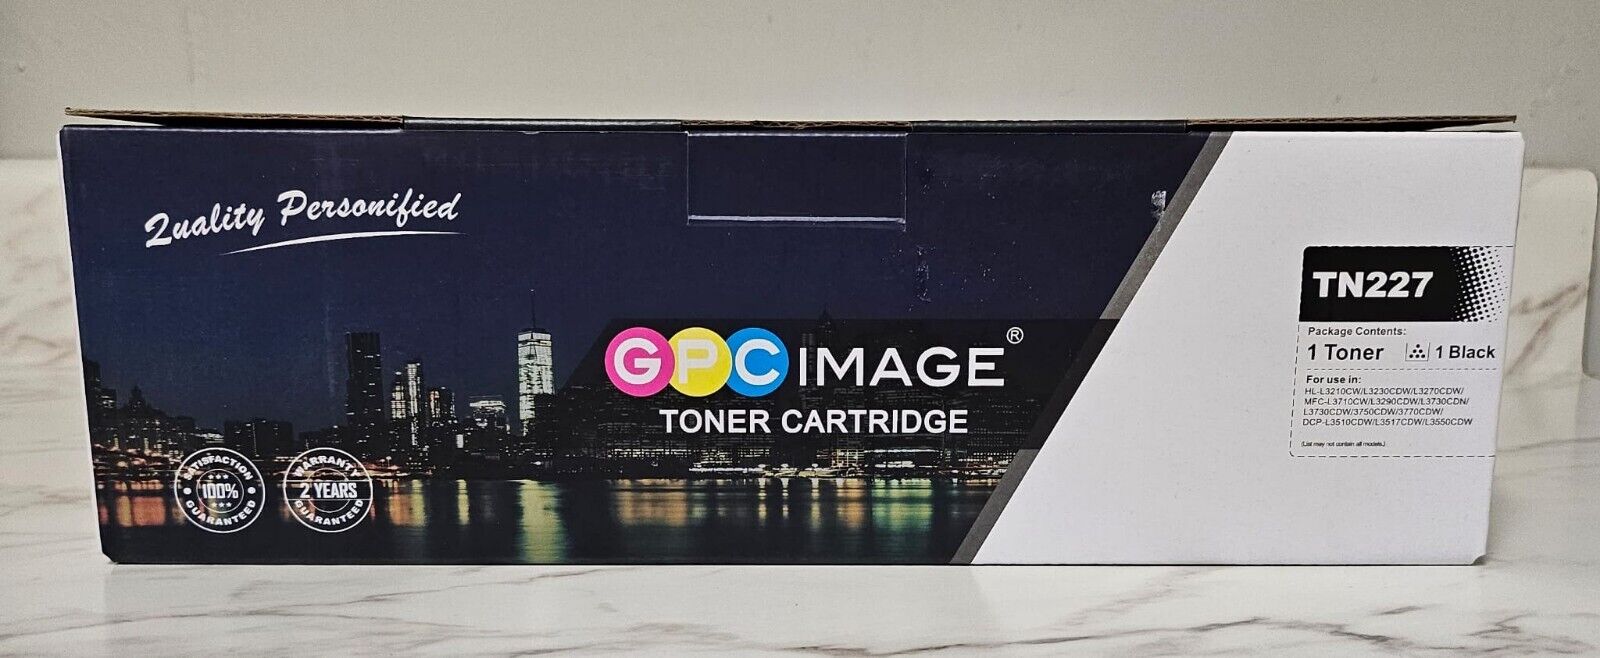 GPC Image Compatible Toner Cartridge Set Replacement for Brother TN227